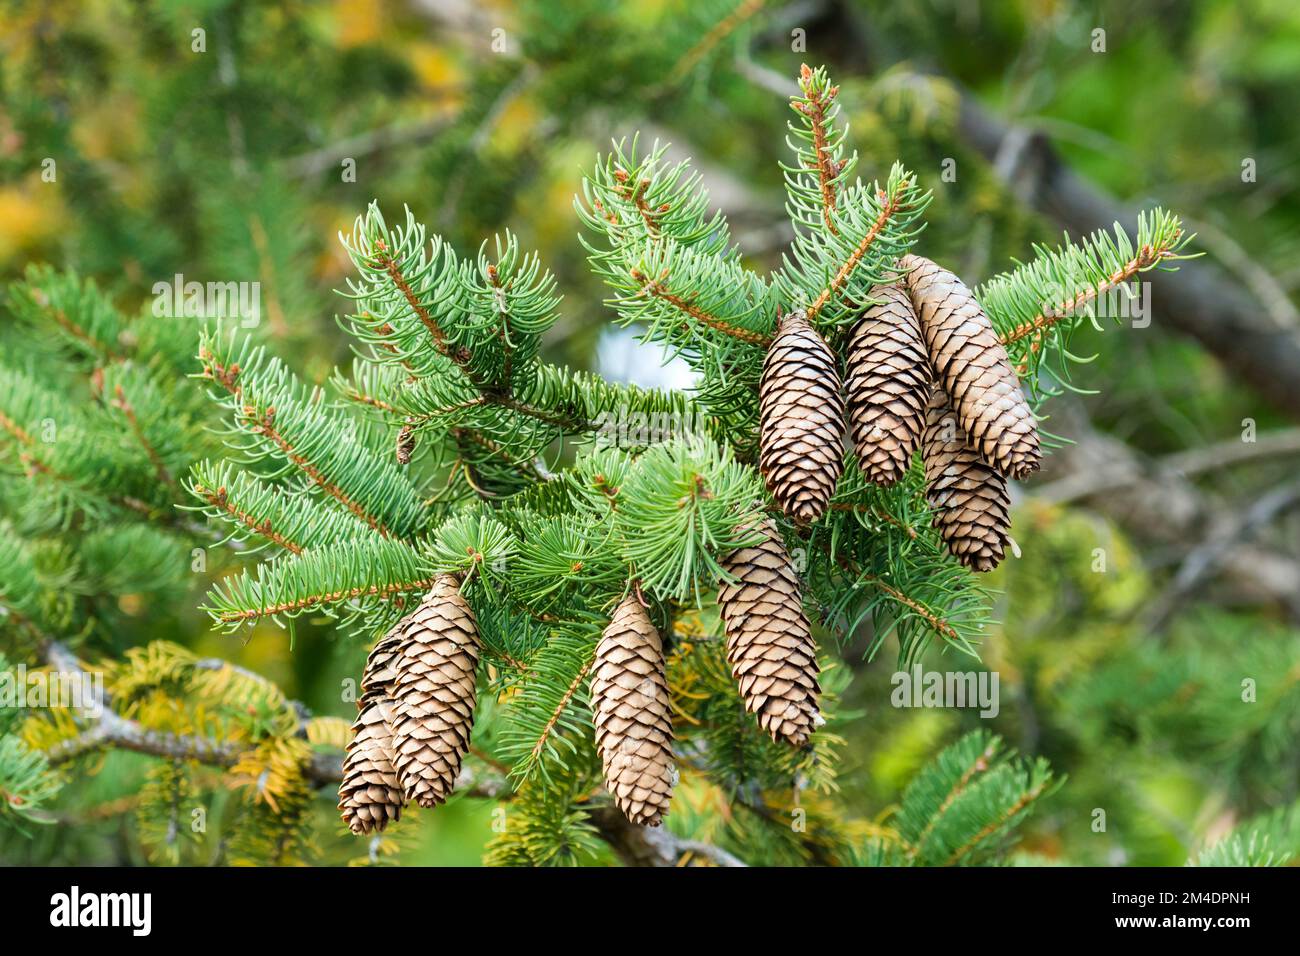 Norway spruce cones (Picea Abies) Stock Photo